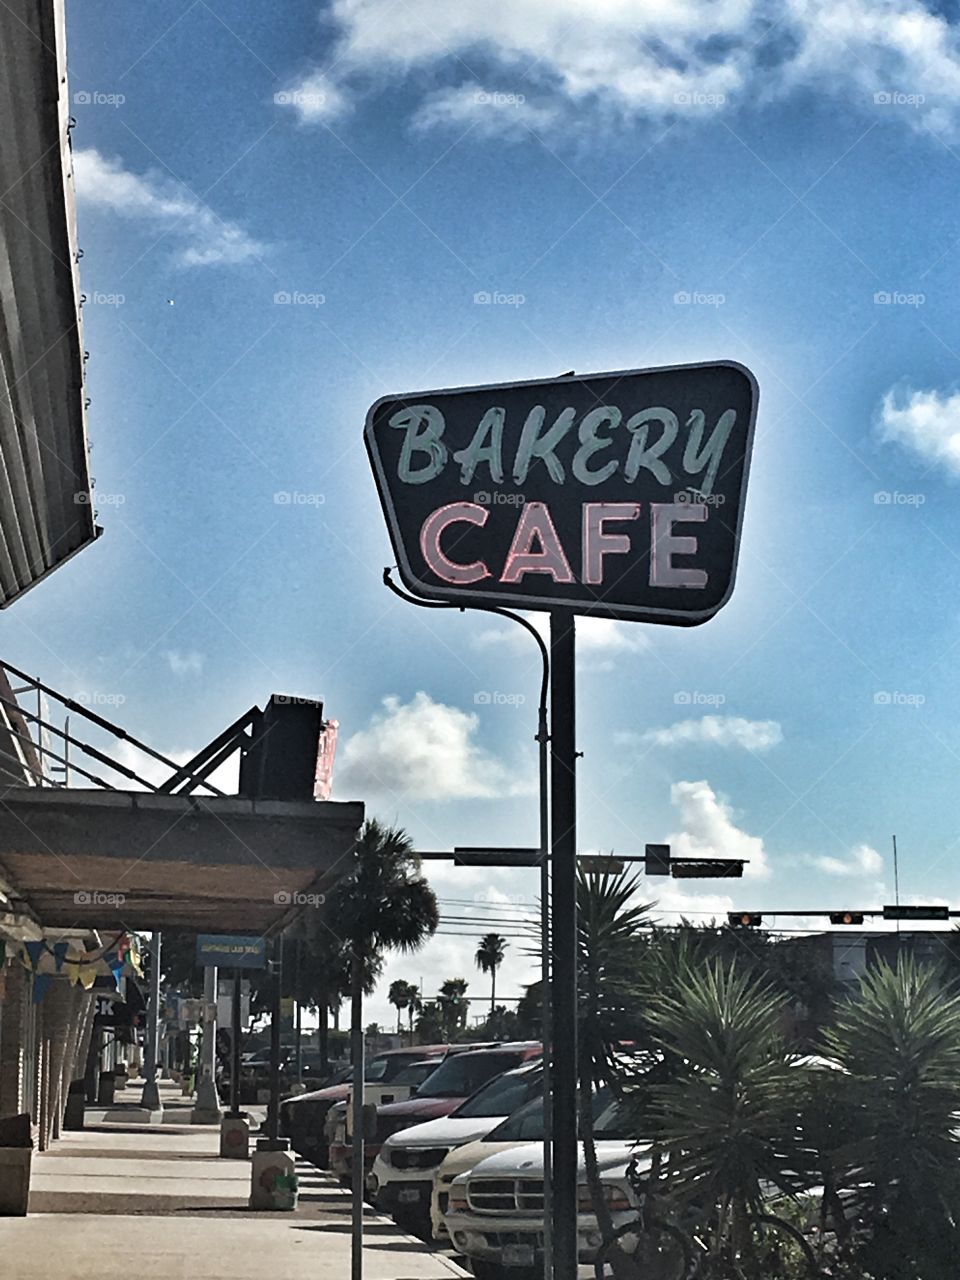 The Bakery Cafe neon sign in Aransas Pass - since 1929. 